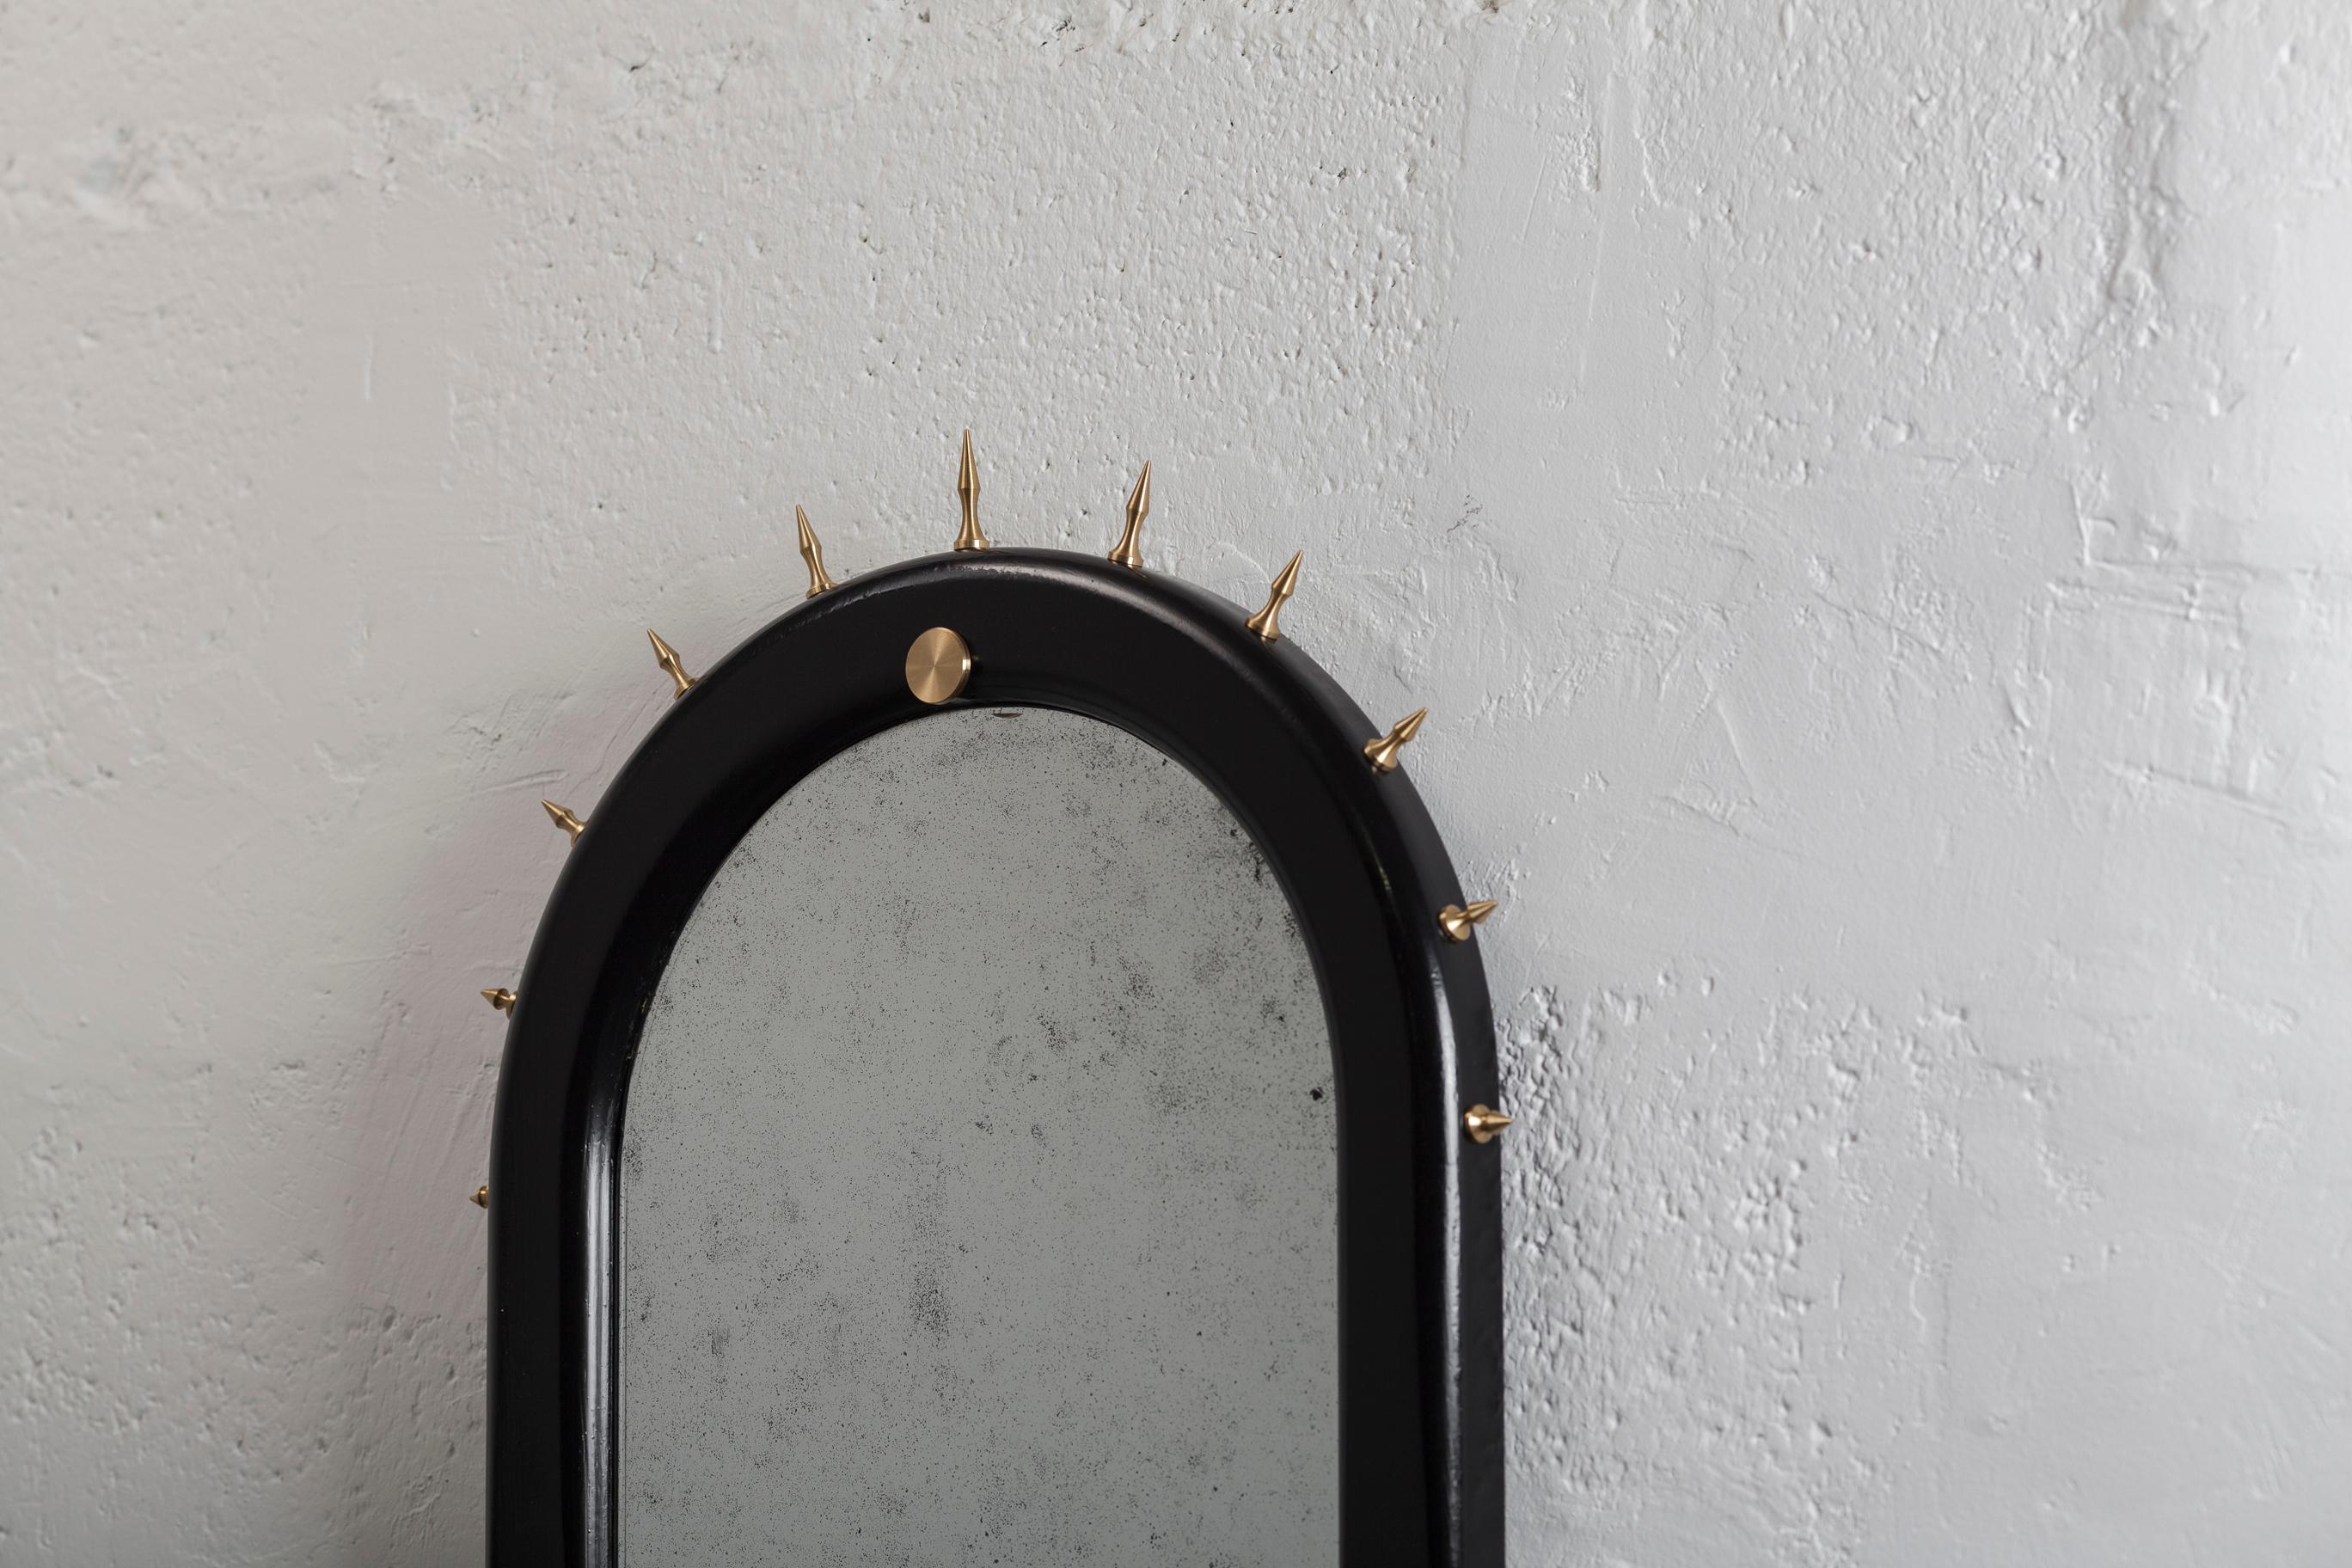 Contemporary Sitiera_01 Wall Mirror in Solid Wood by ANDEAN, Represented by Tuleste Factory For Sale